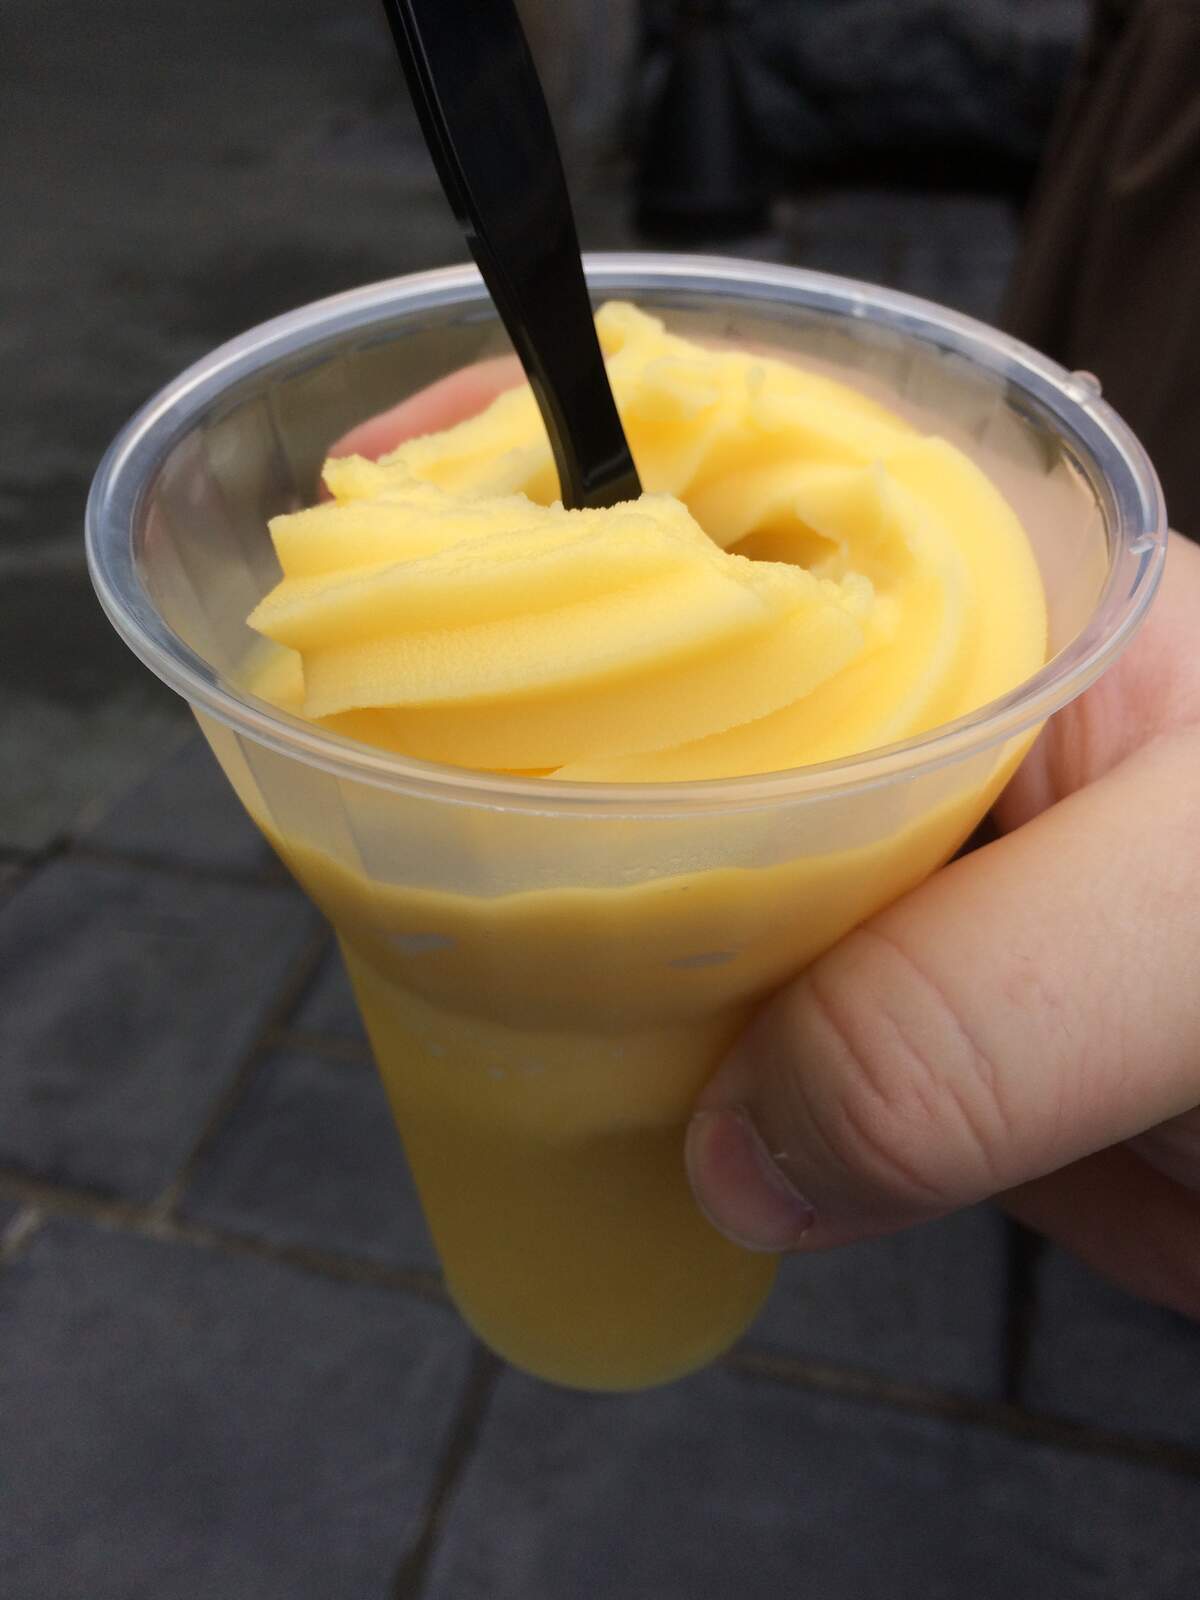 Image for National DOLE Whip Day